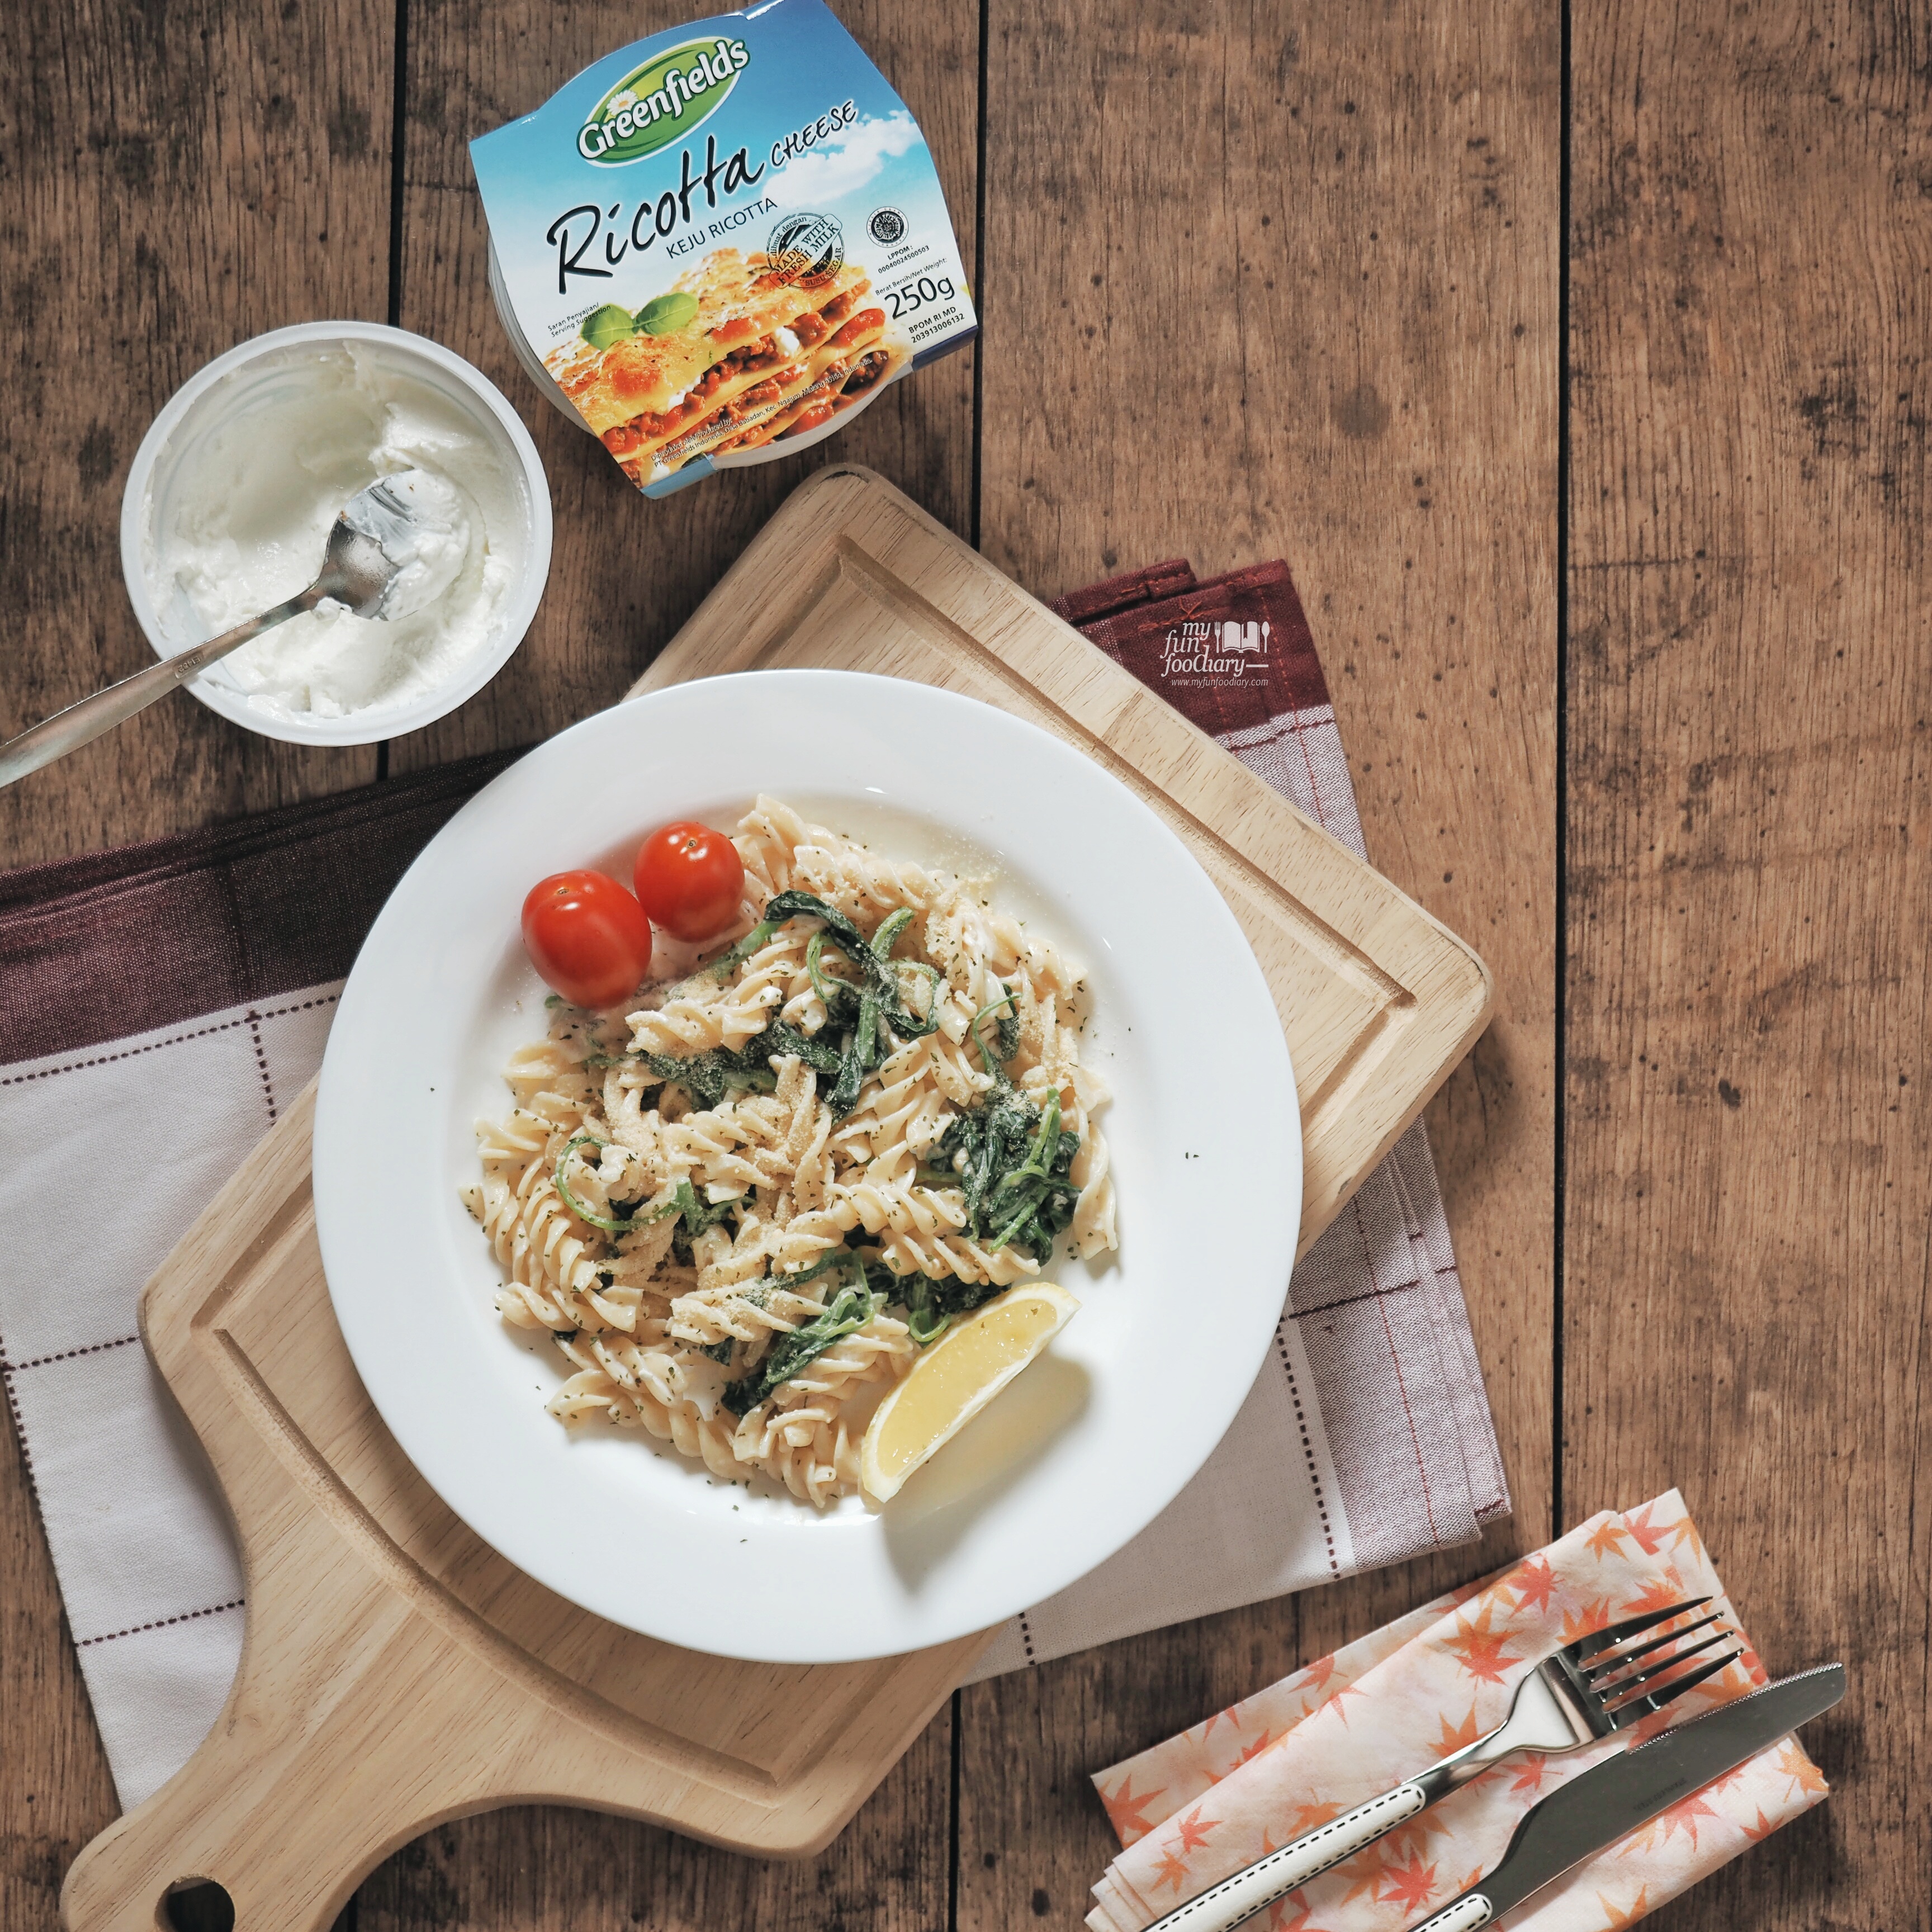 Fusili Pasta with Ricotta and Spinach by Myfunfoodiary